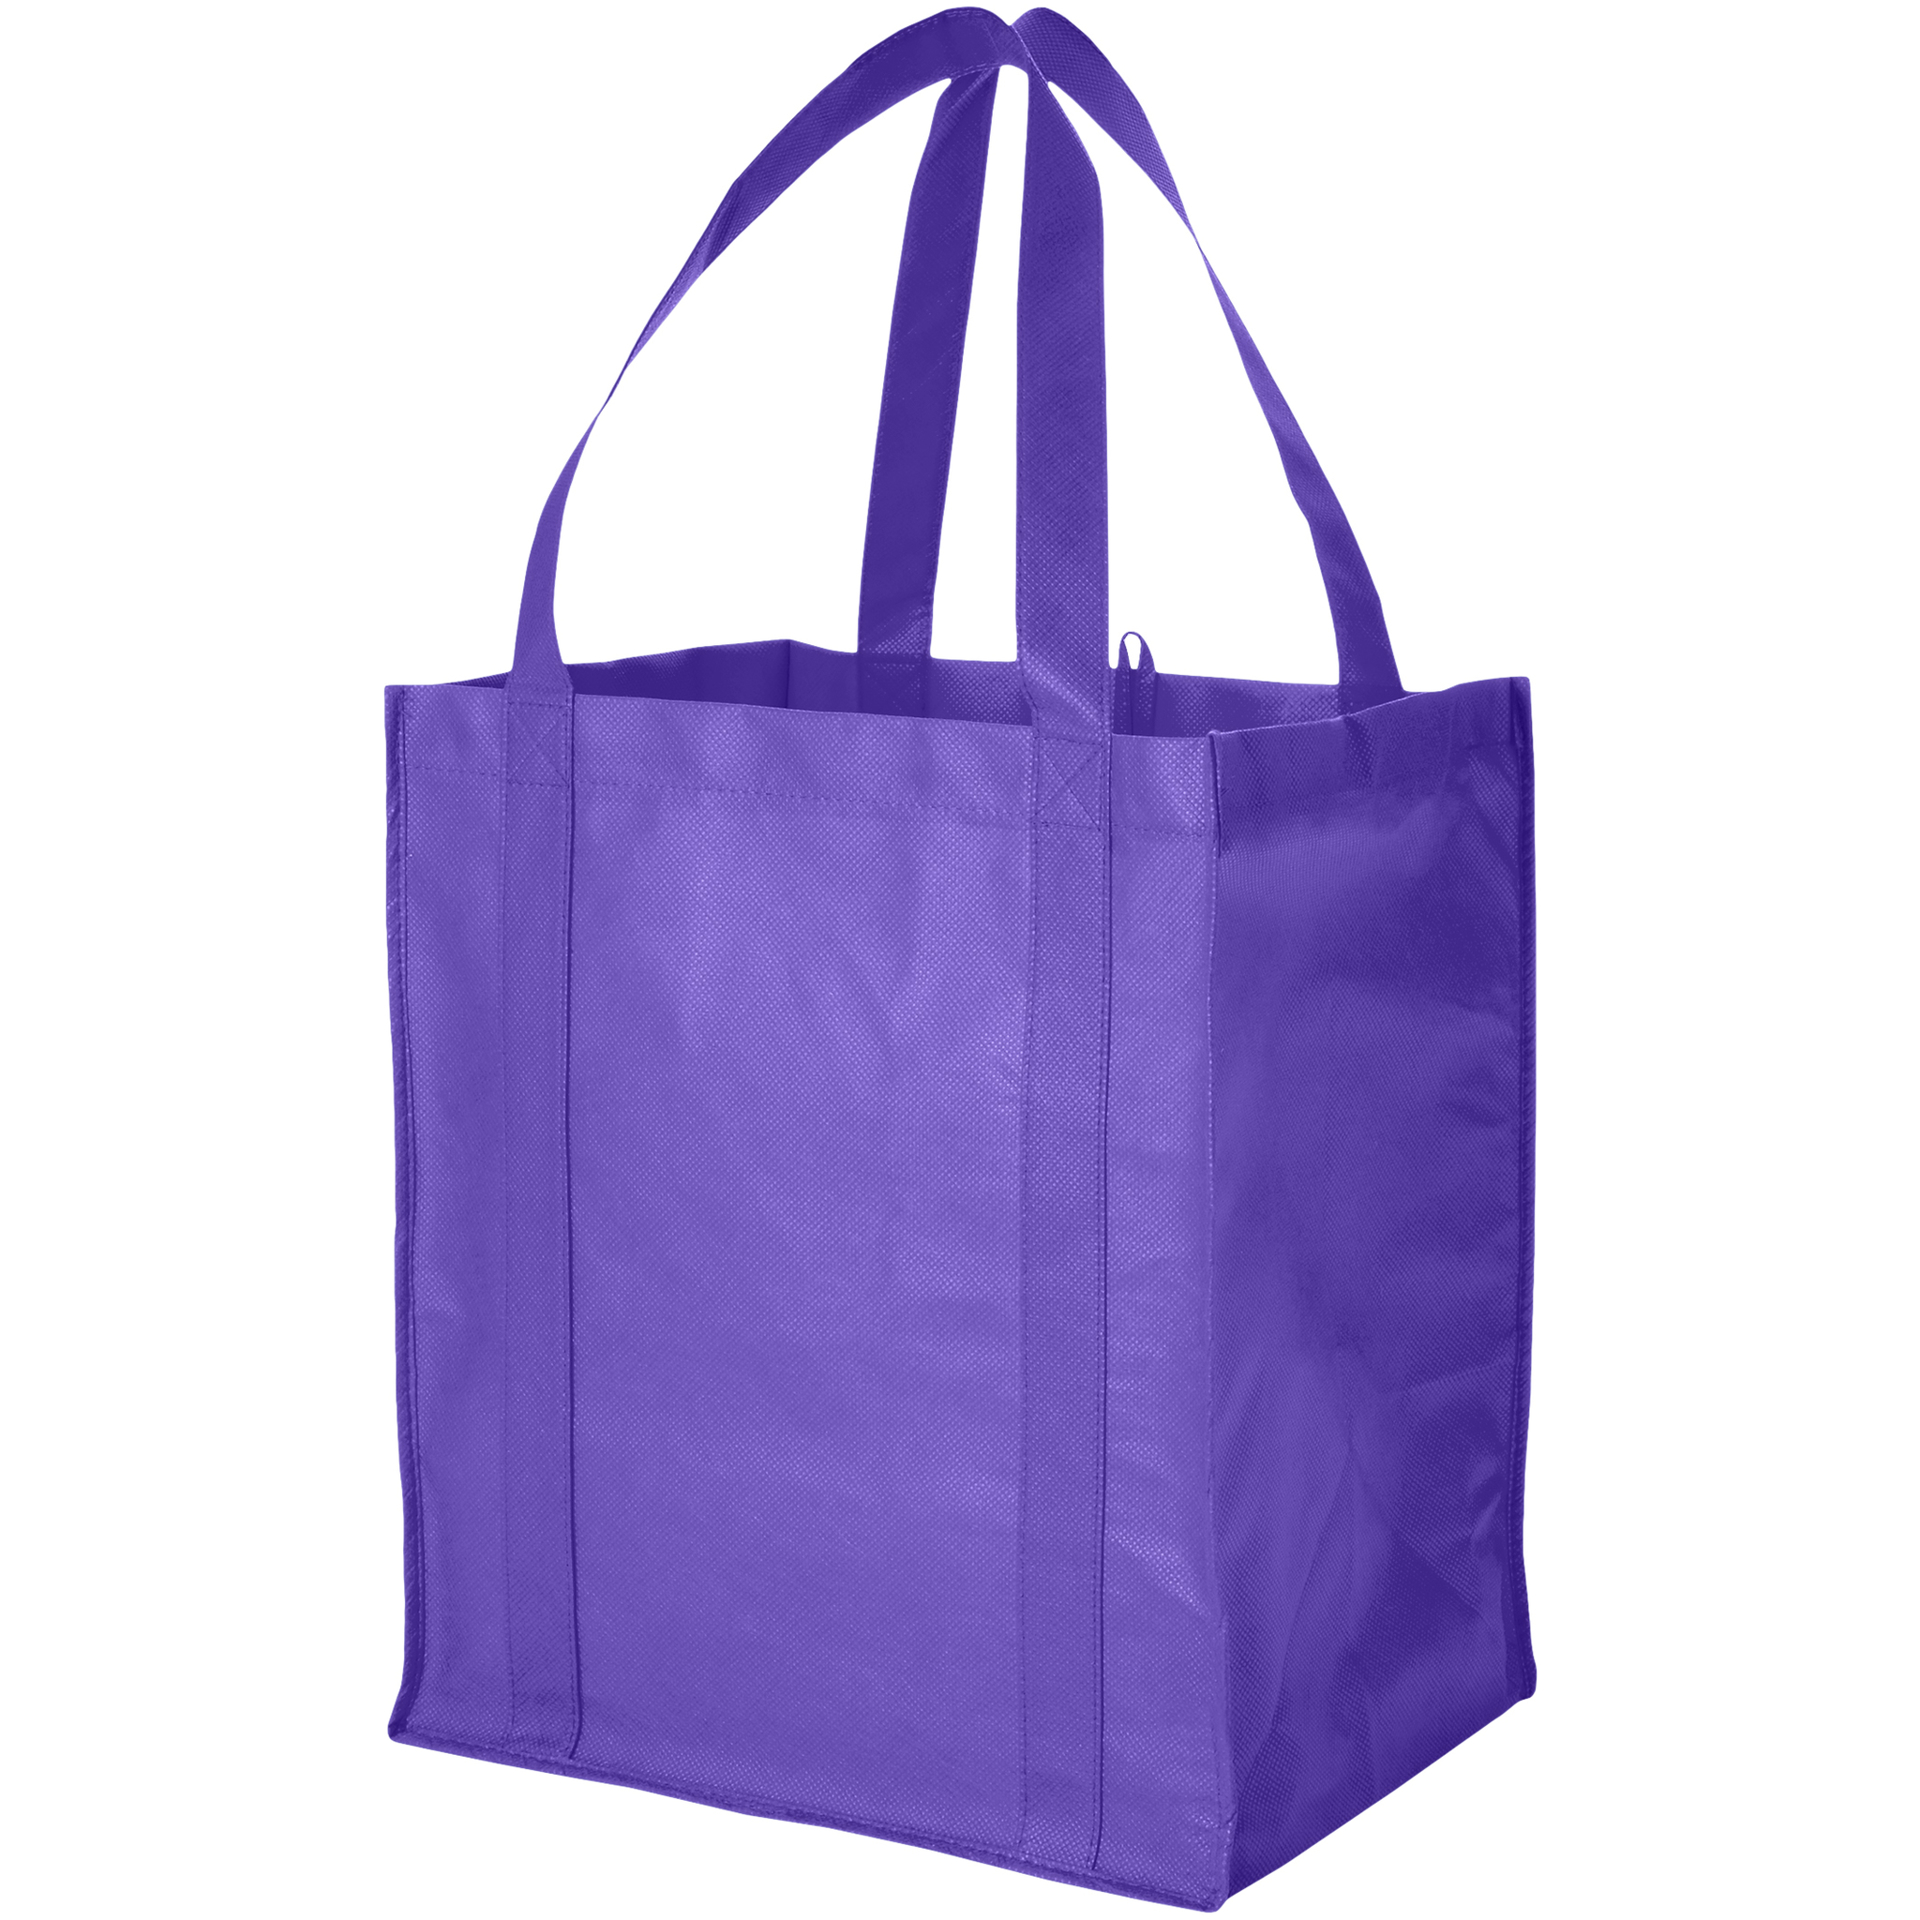 Purple shopper tote with large side gussets and carry handles